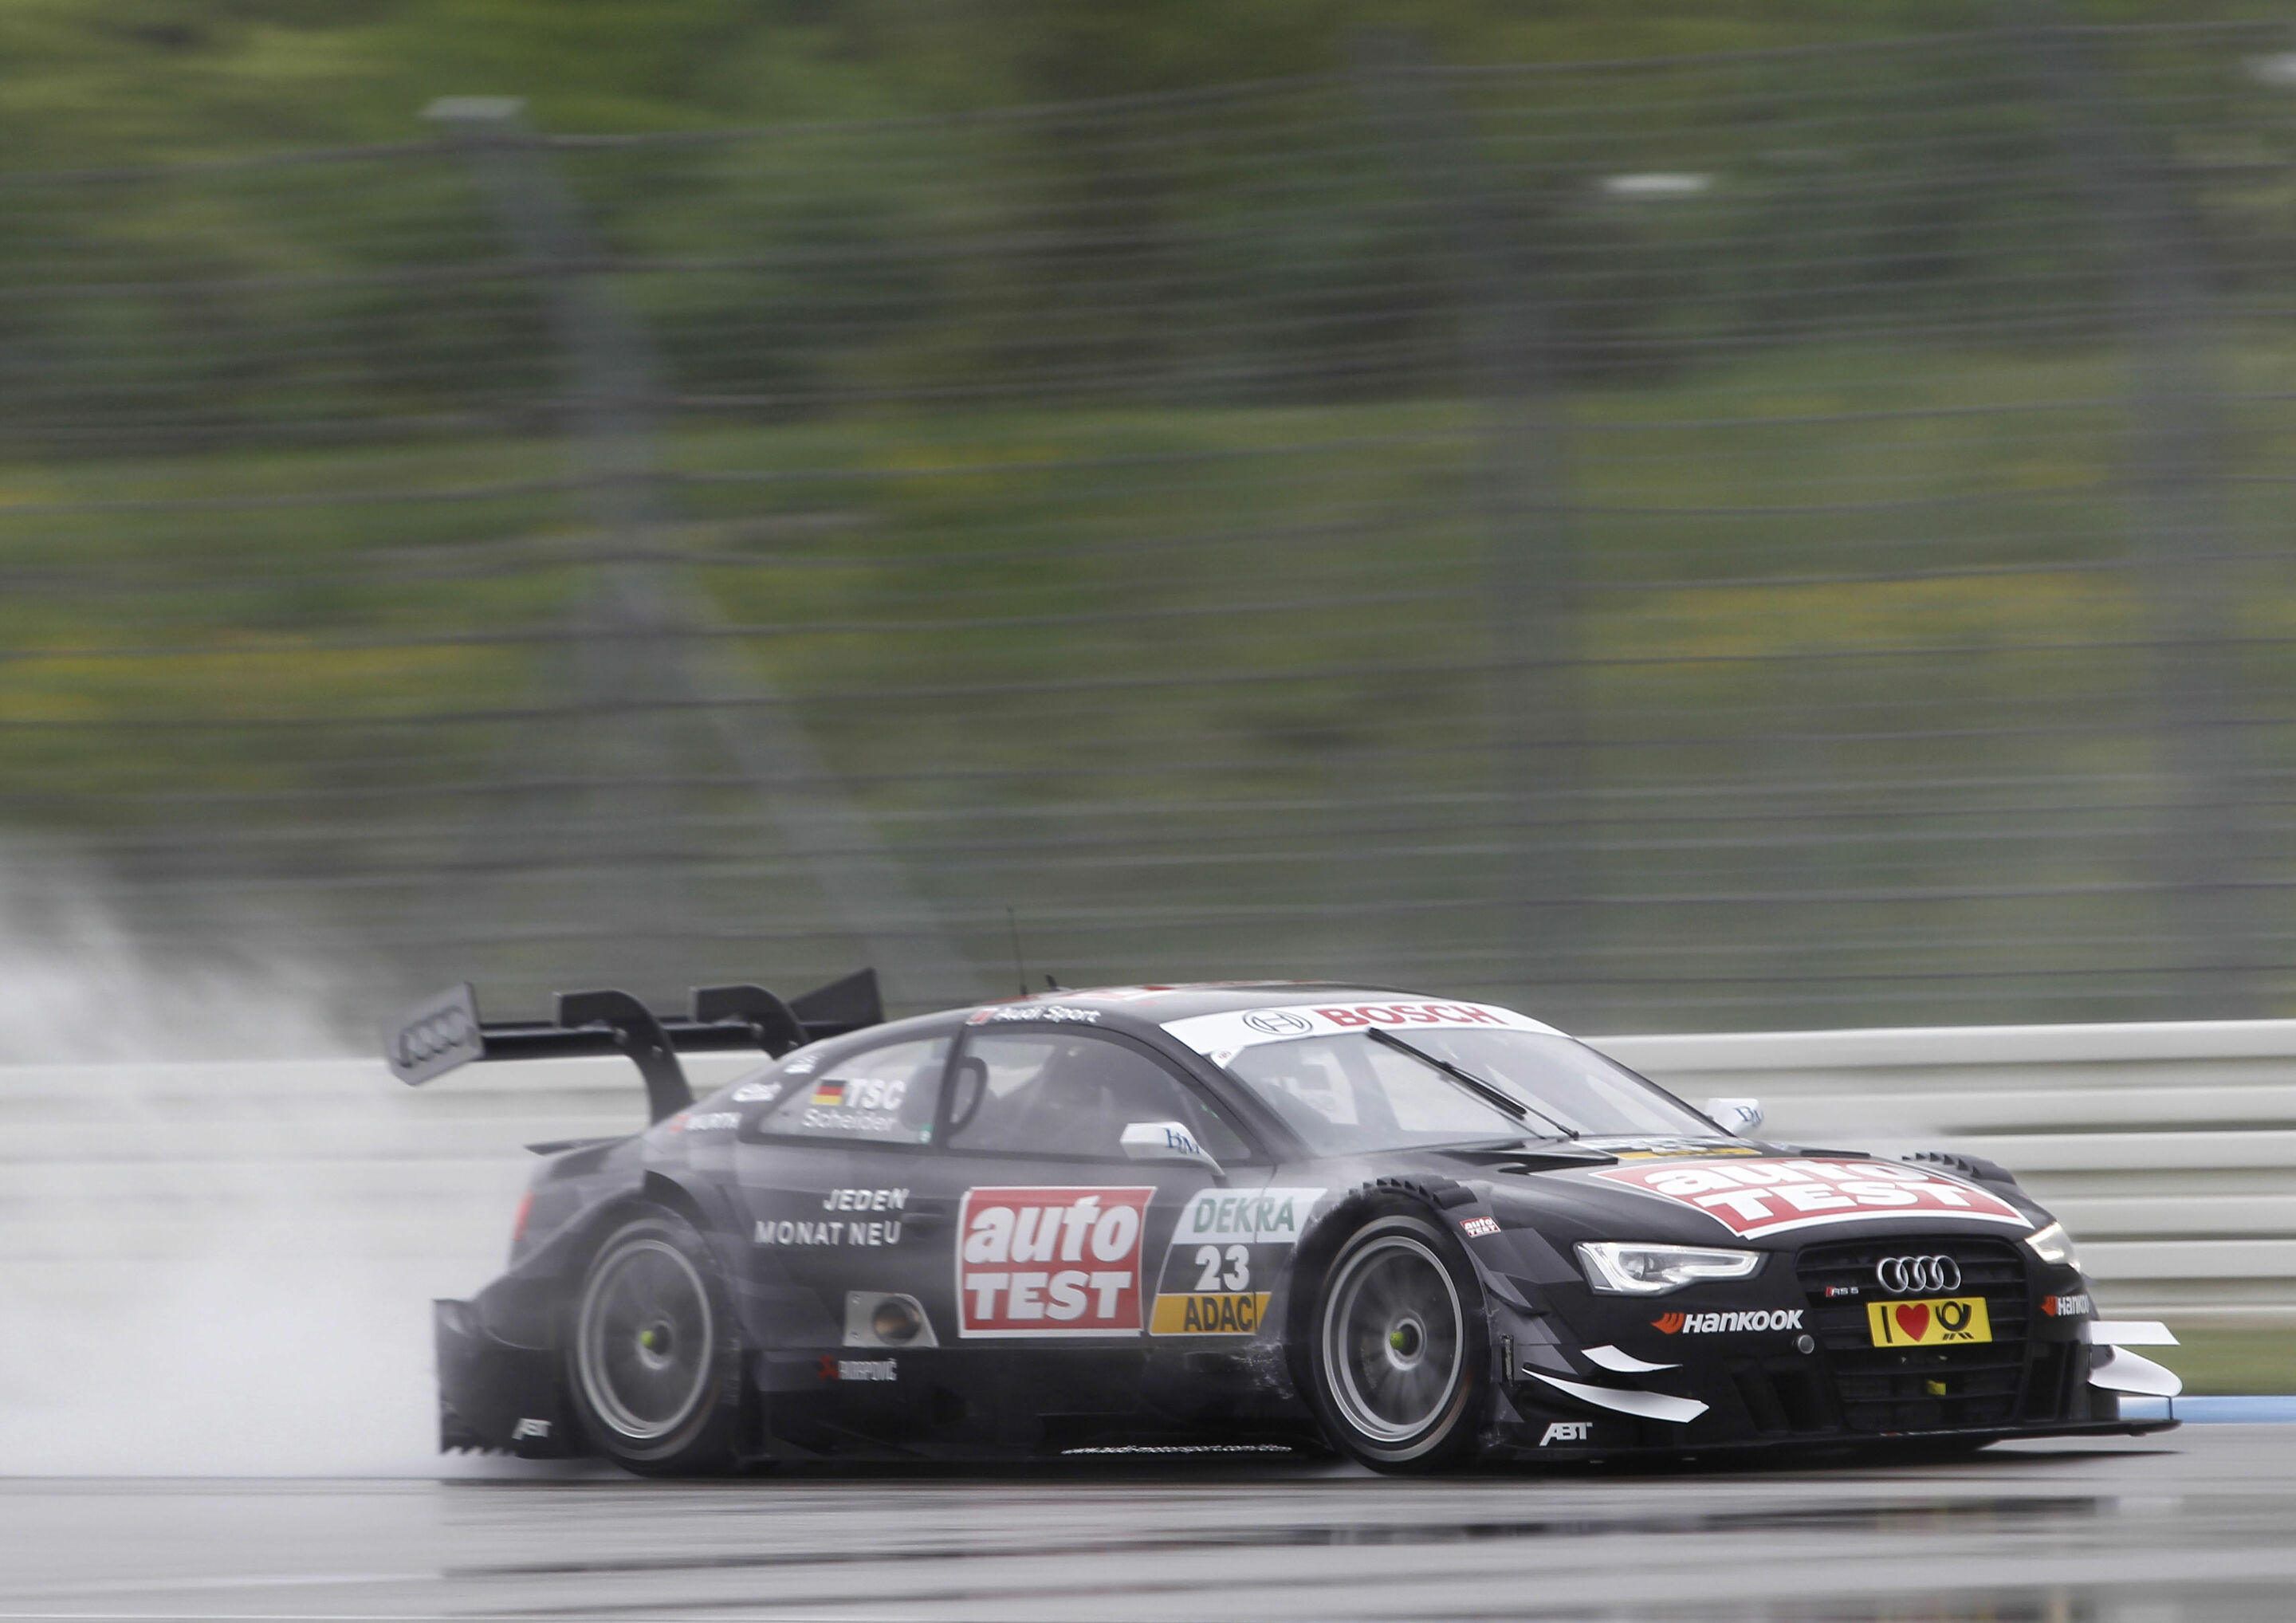 Pole position for the Audi RS 5 DTM